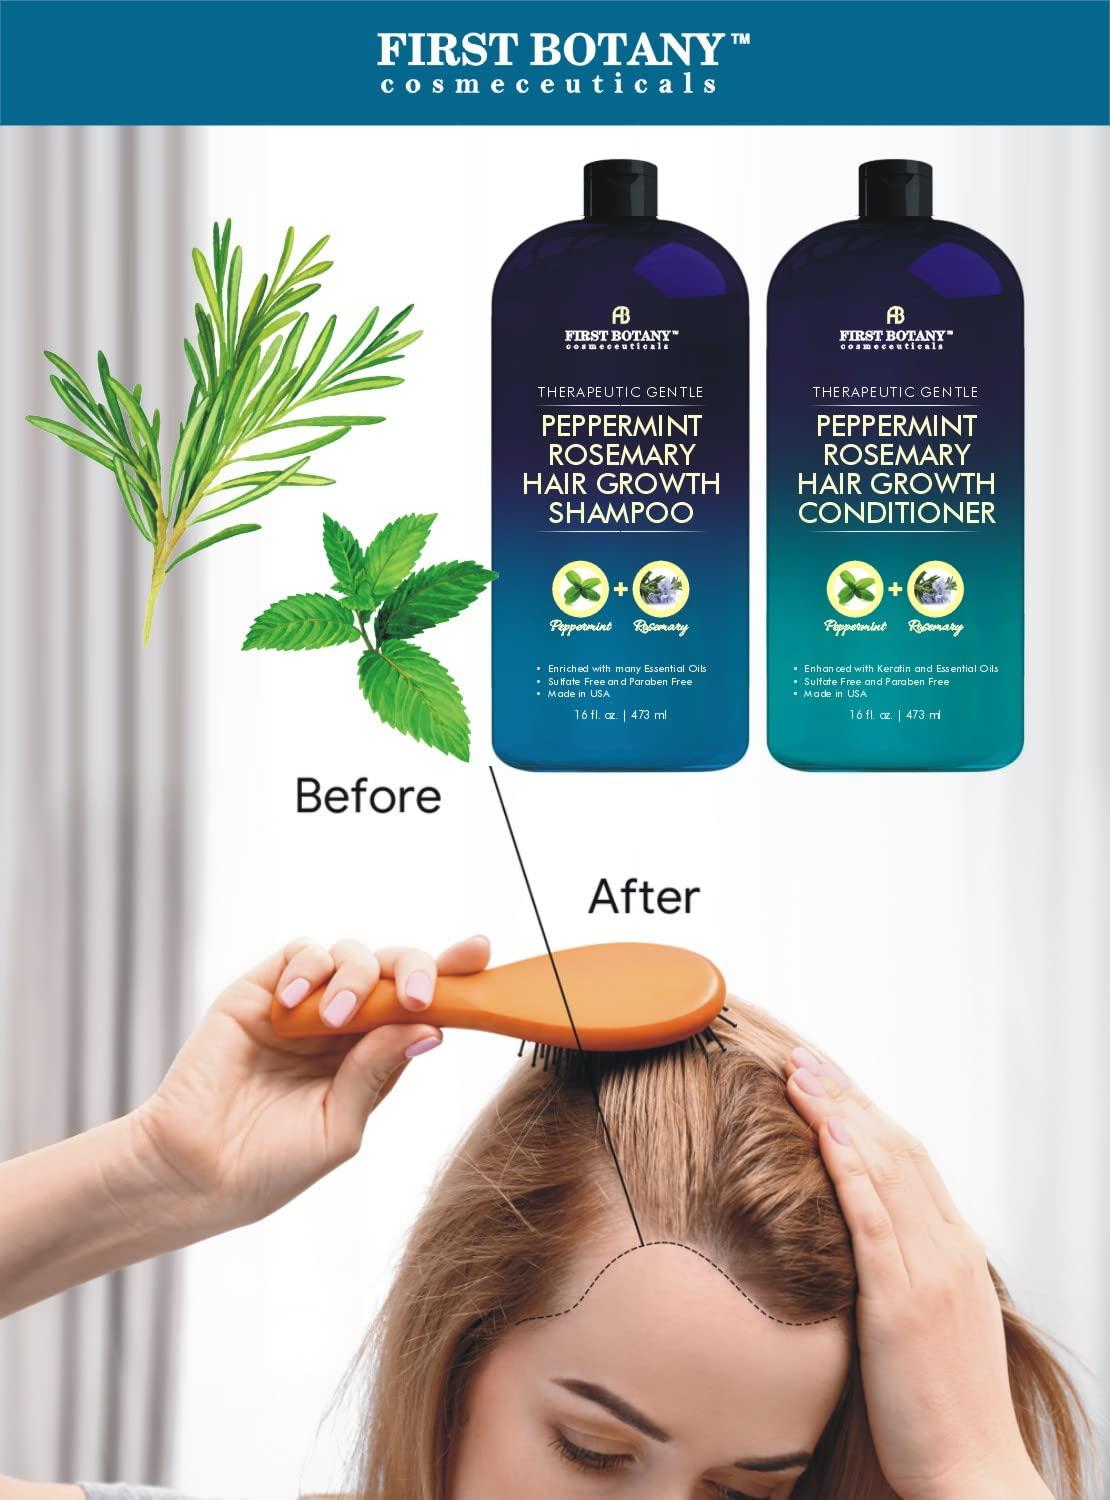 Peppermint Rosemary Hair Regrowth and Anti Hair Loss Shampoo and  Conditioner Set - Daily Hydrating, Detoxifying, Volumizing Shampoo and  Fights Dandruff For Men and Women 16 fl oz x 2